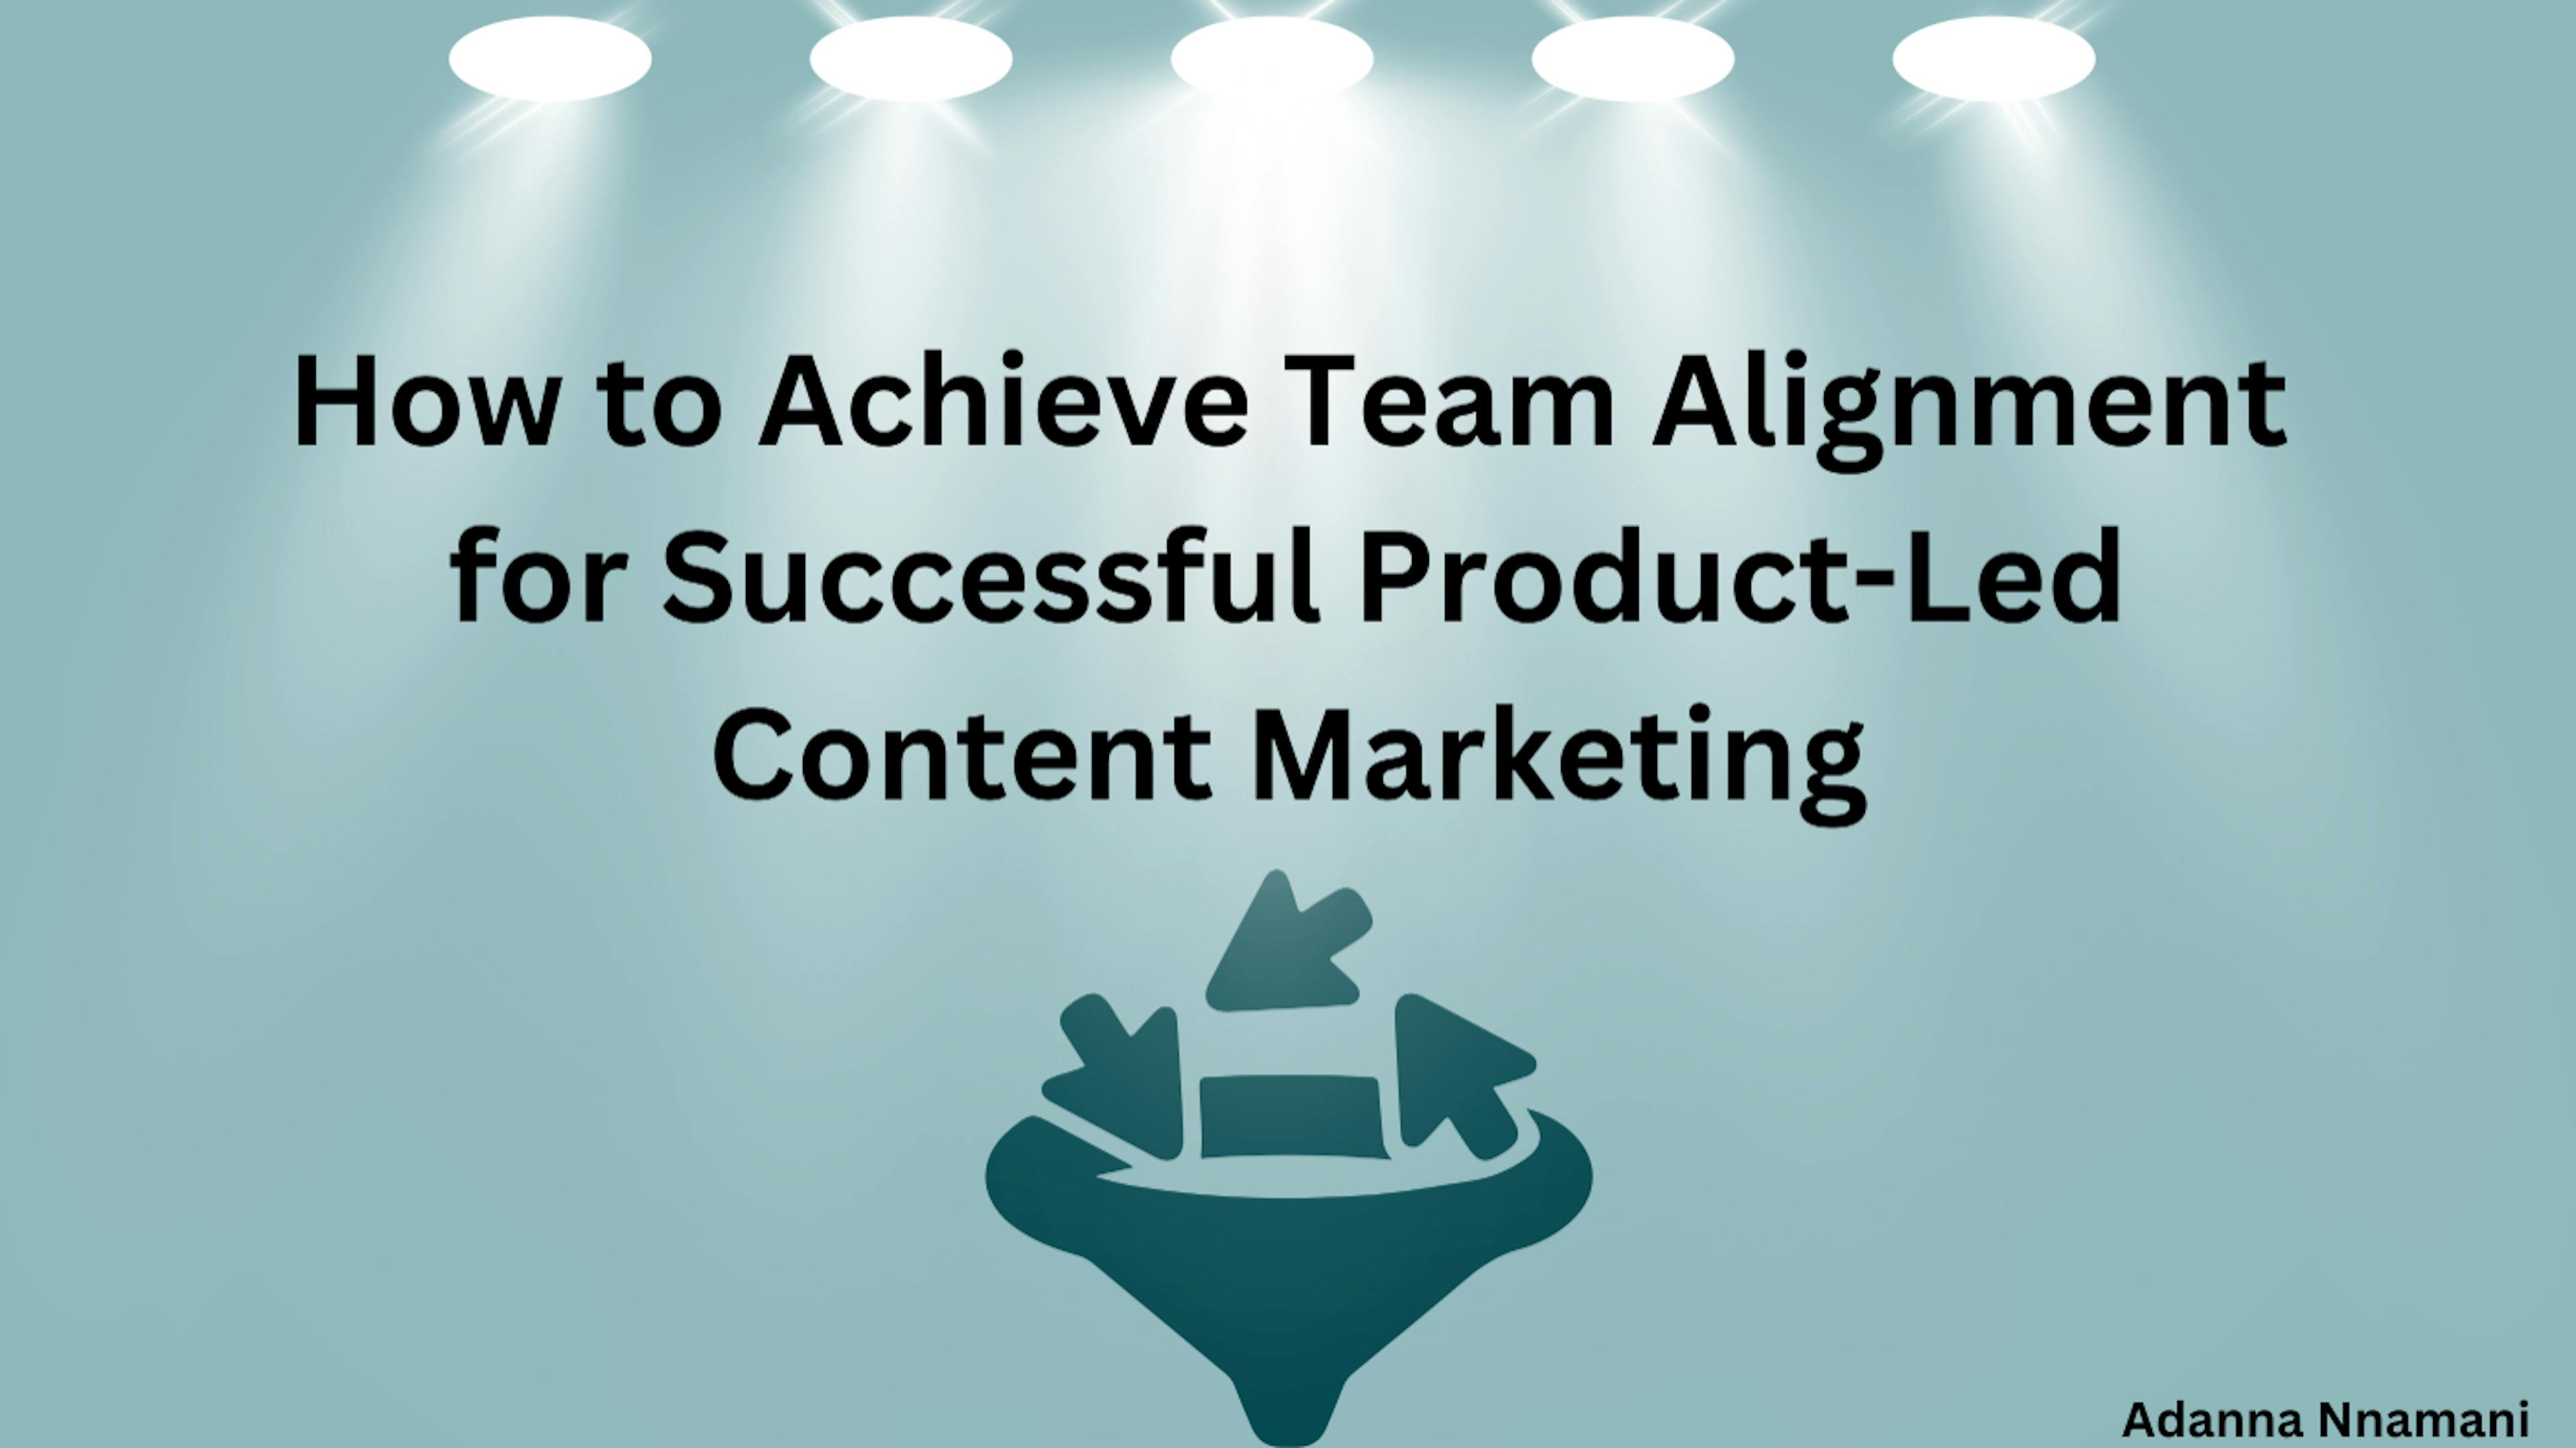 featured image - How to Achieve Team Alignment for Successful Product-Led Content Marketing